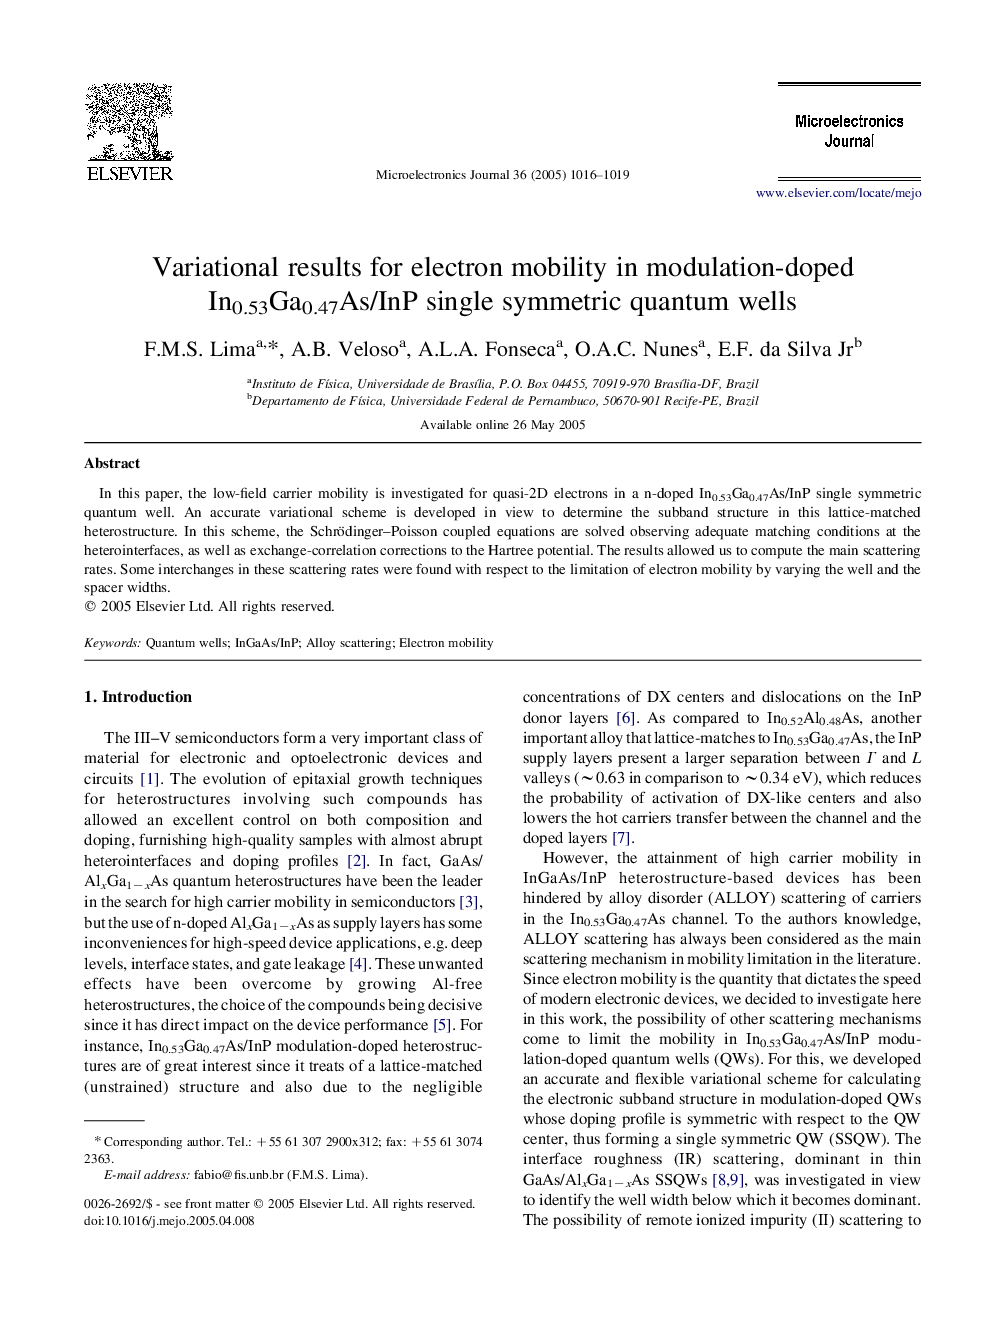 Variational results for electron mobility in modulation-doped In0.53Ga0.47As/InP single symmetric quantum wells